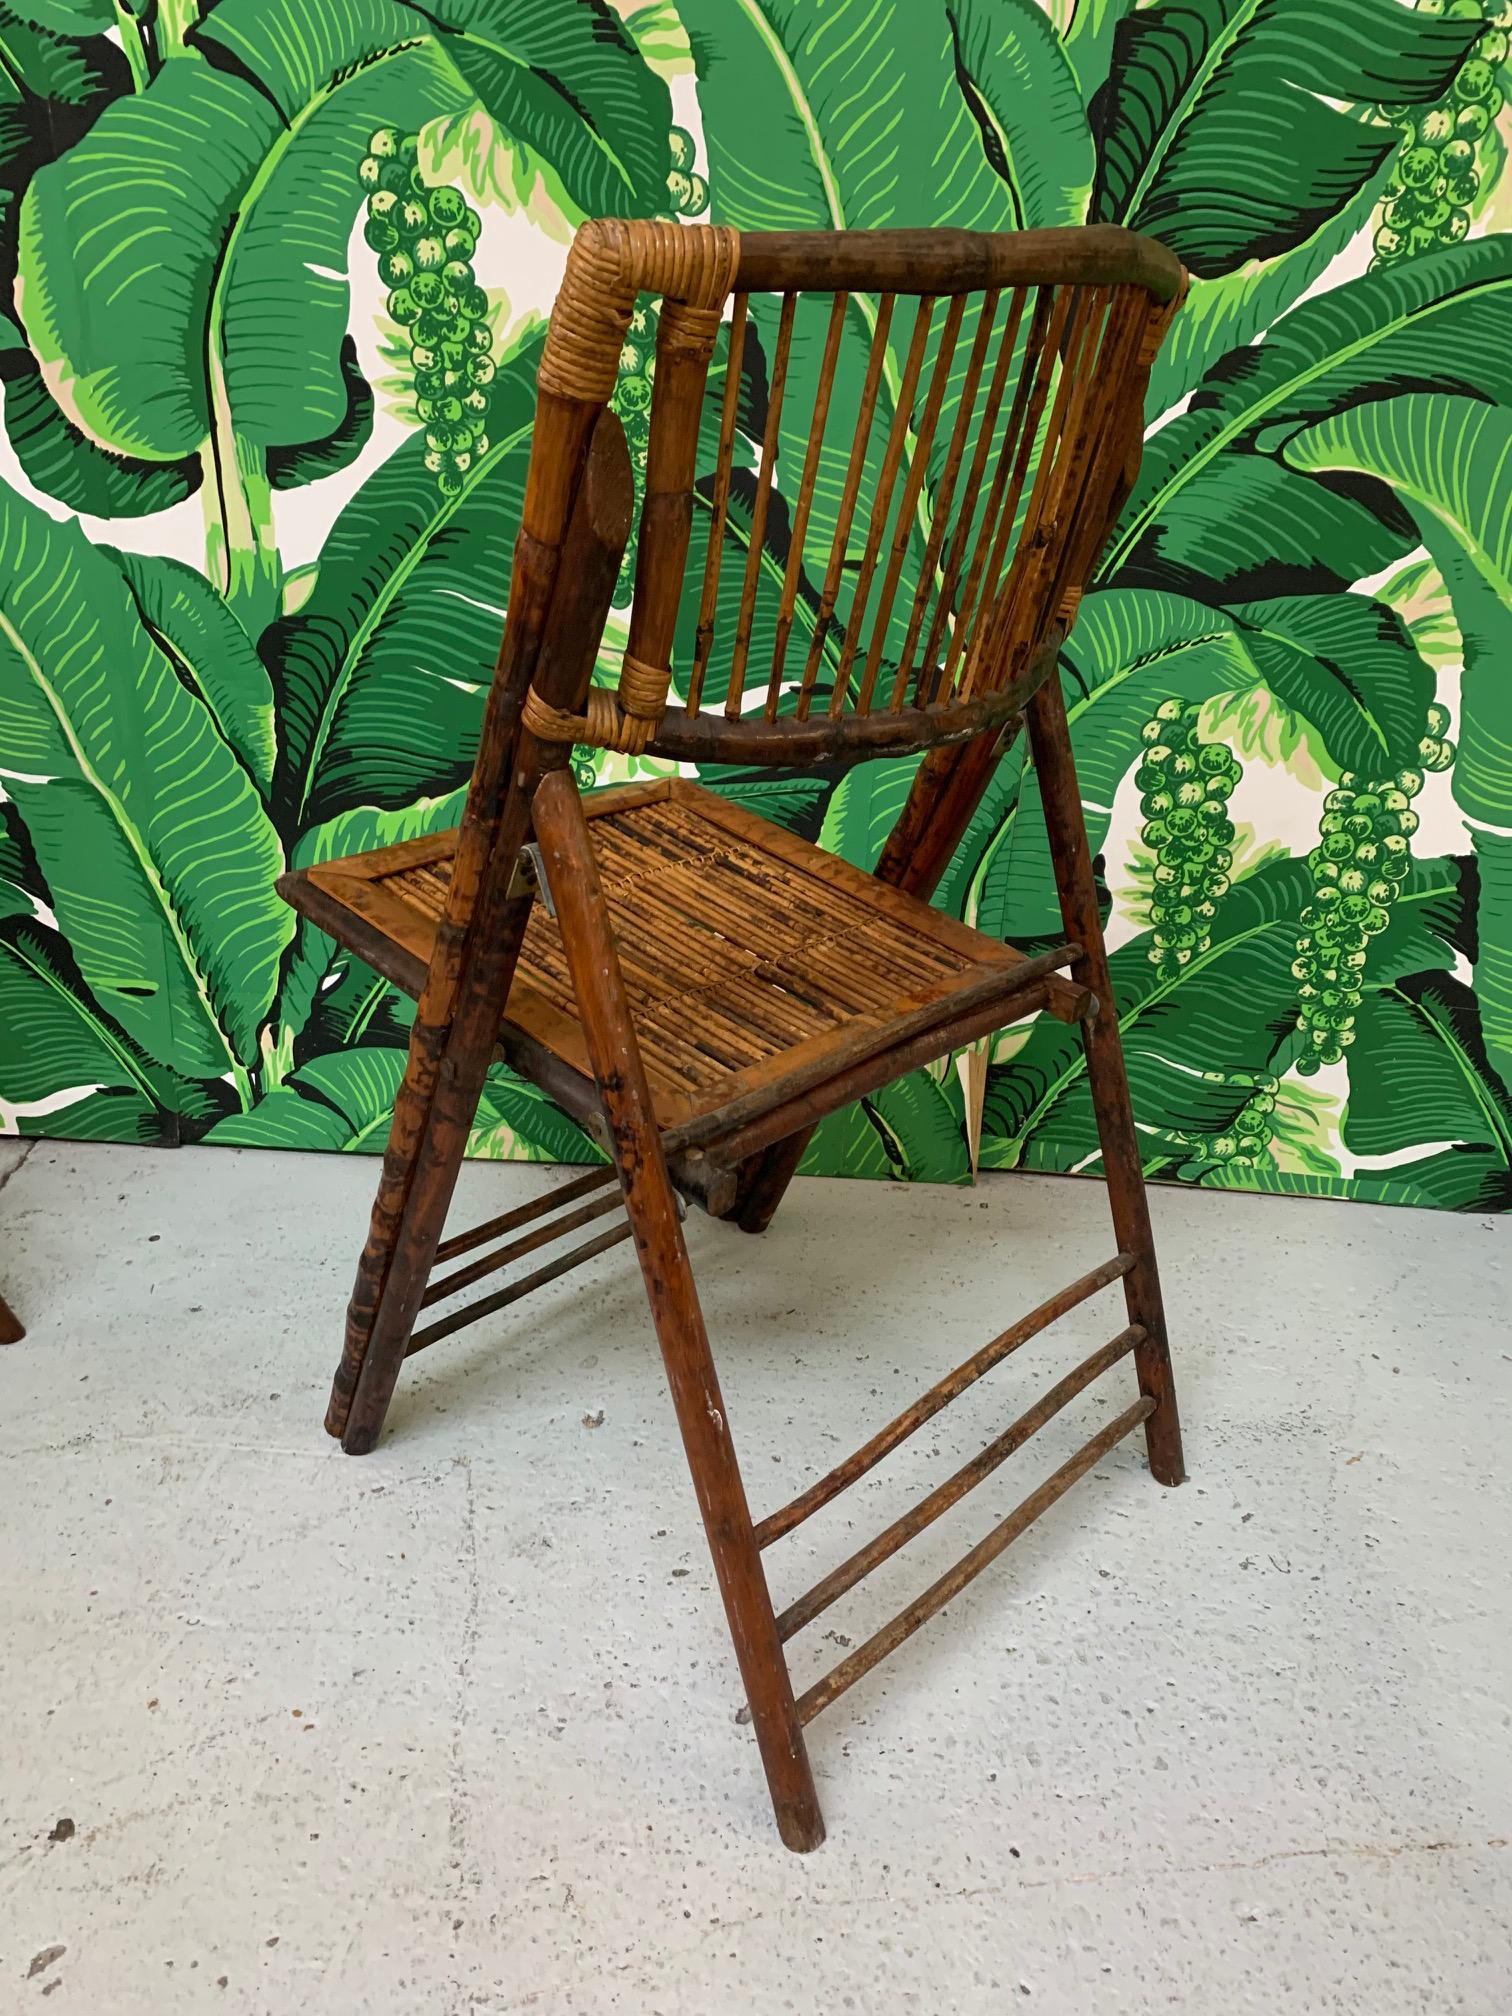 Set of ten bamboo safari chairs feature tiger wood design and folding frame for easy storage. Perfect for a garden party or for interior use as well. Good vintage condition with minor imperfections consistent with age. Price is for the set.

 